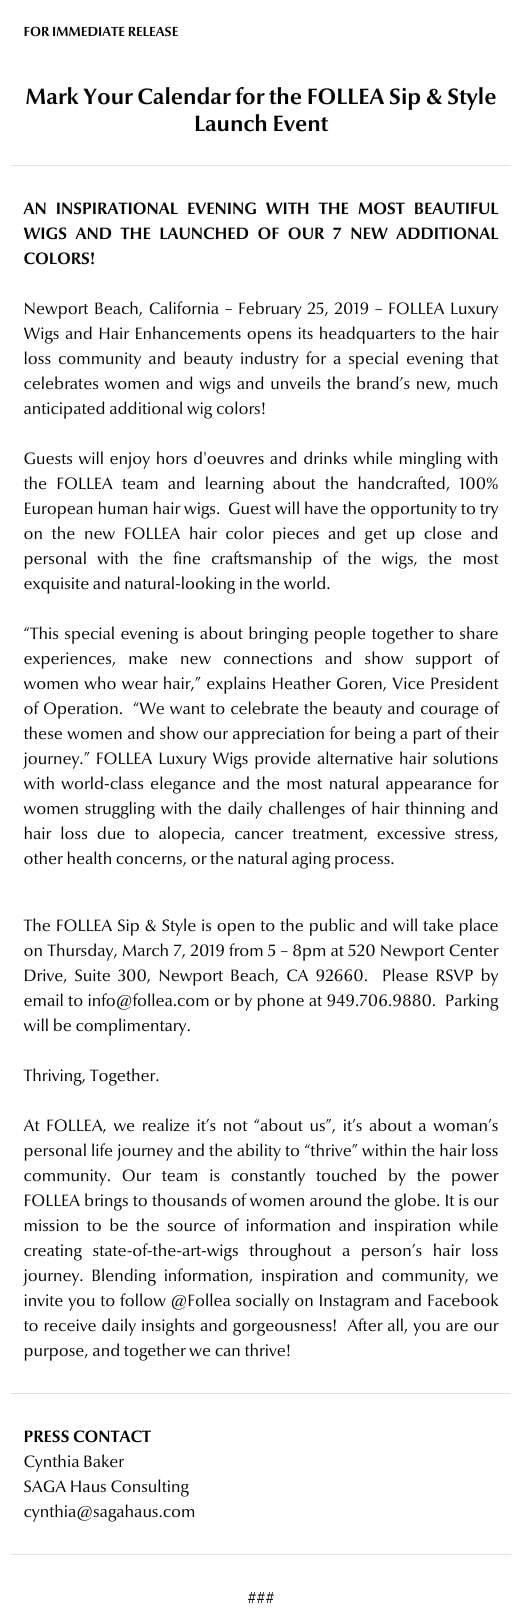 Screenshot of press release highlighting details about a FOLLEA Sip & Style event between the Fantasia Salon and Daniel Alain on Fox News